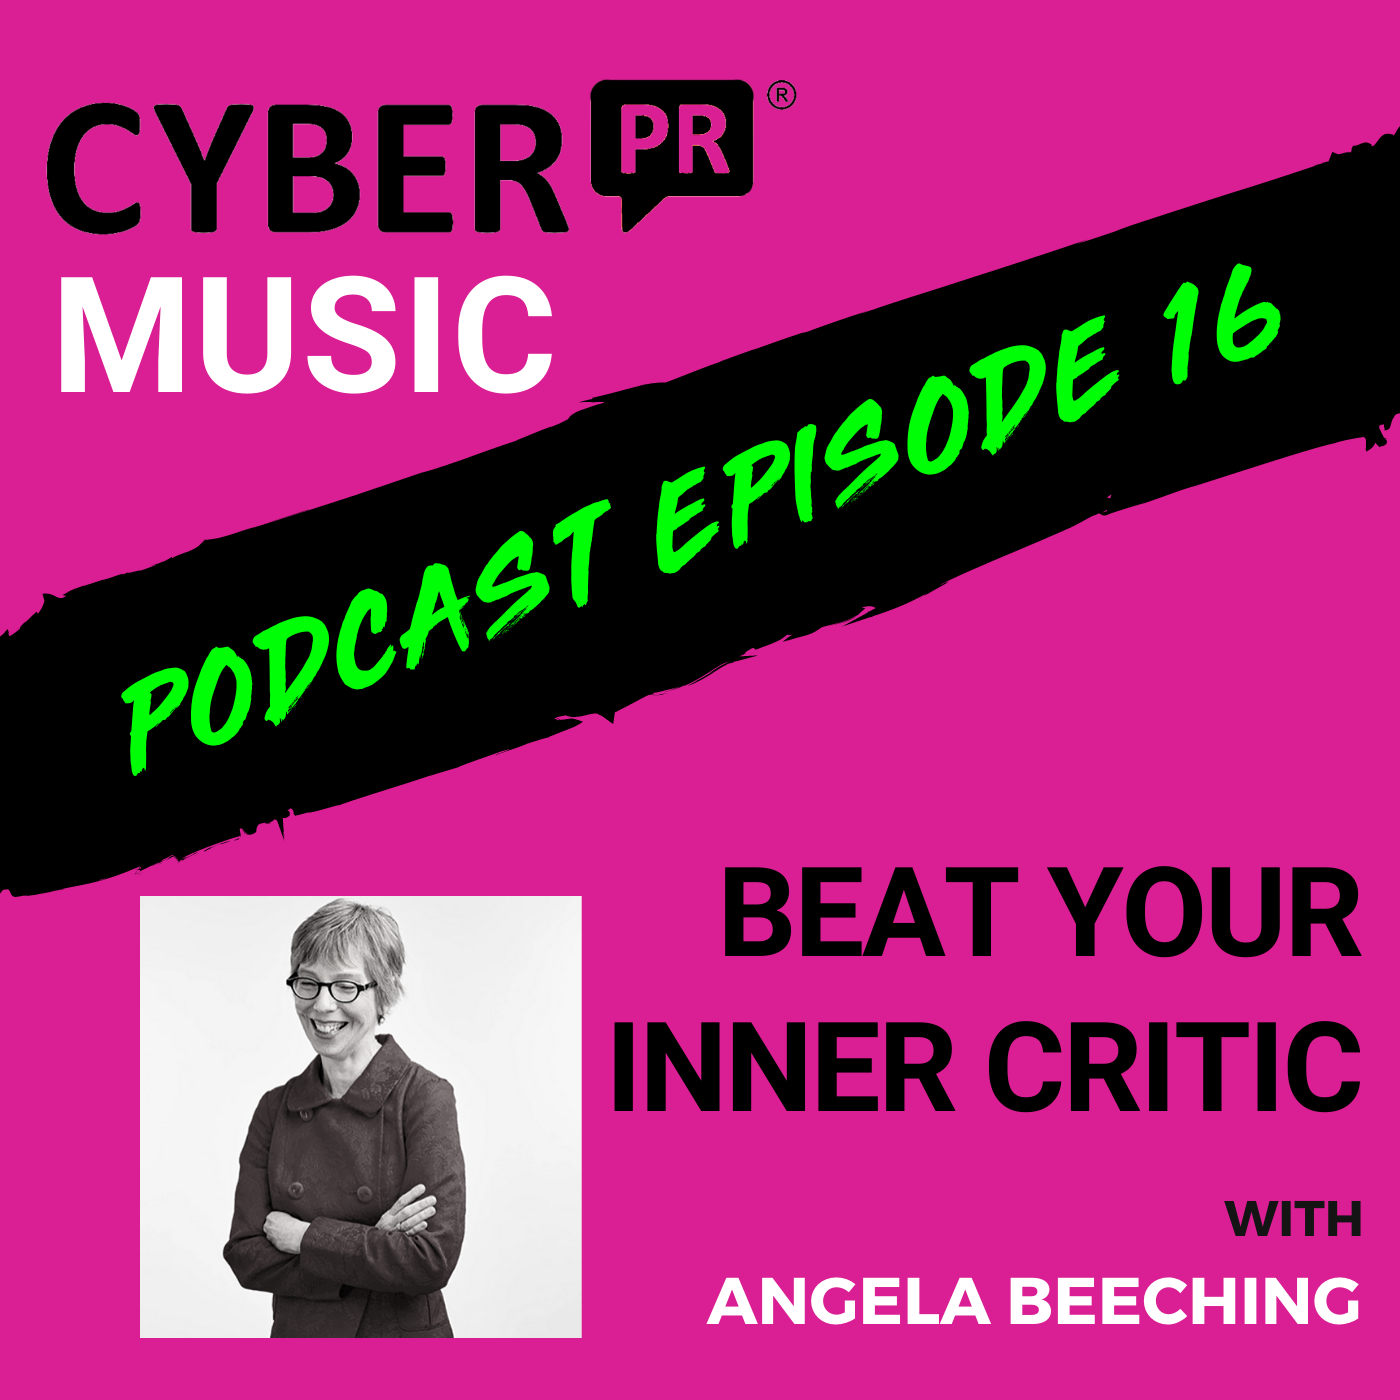 The Cyber PR Music Podcast EP 16: Beat Your Inner Critic with Angela Beeching